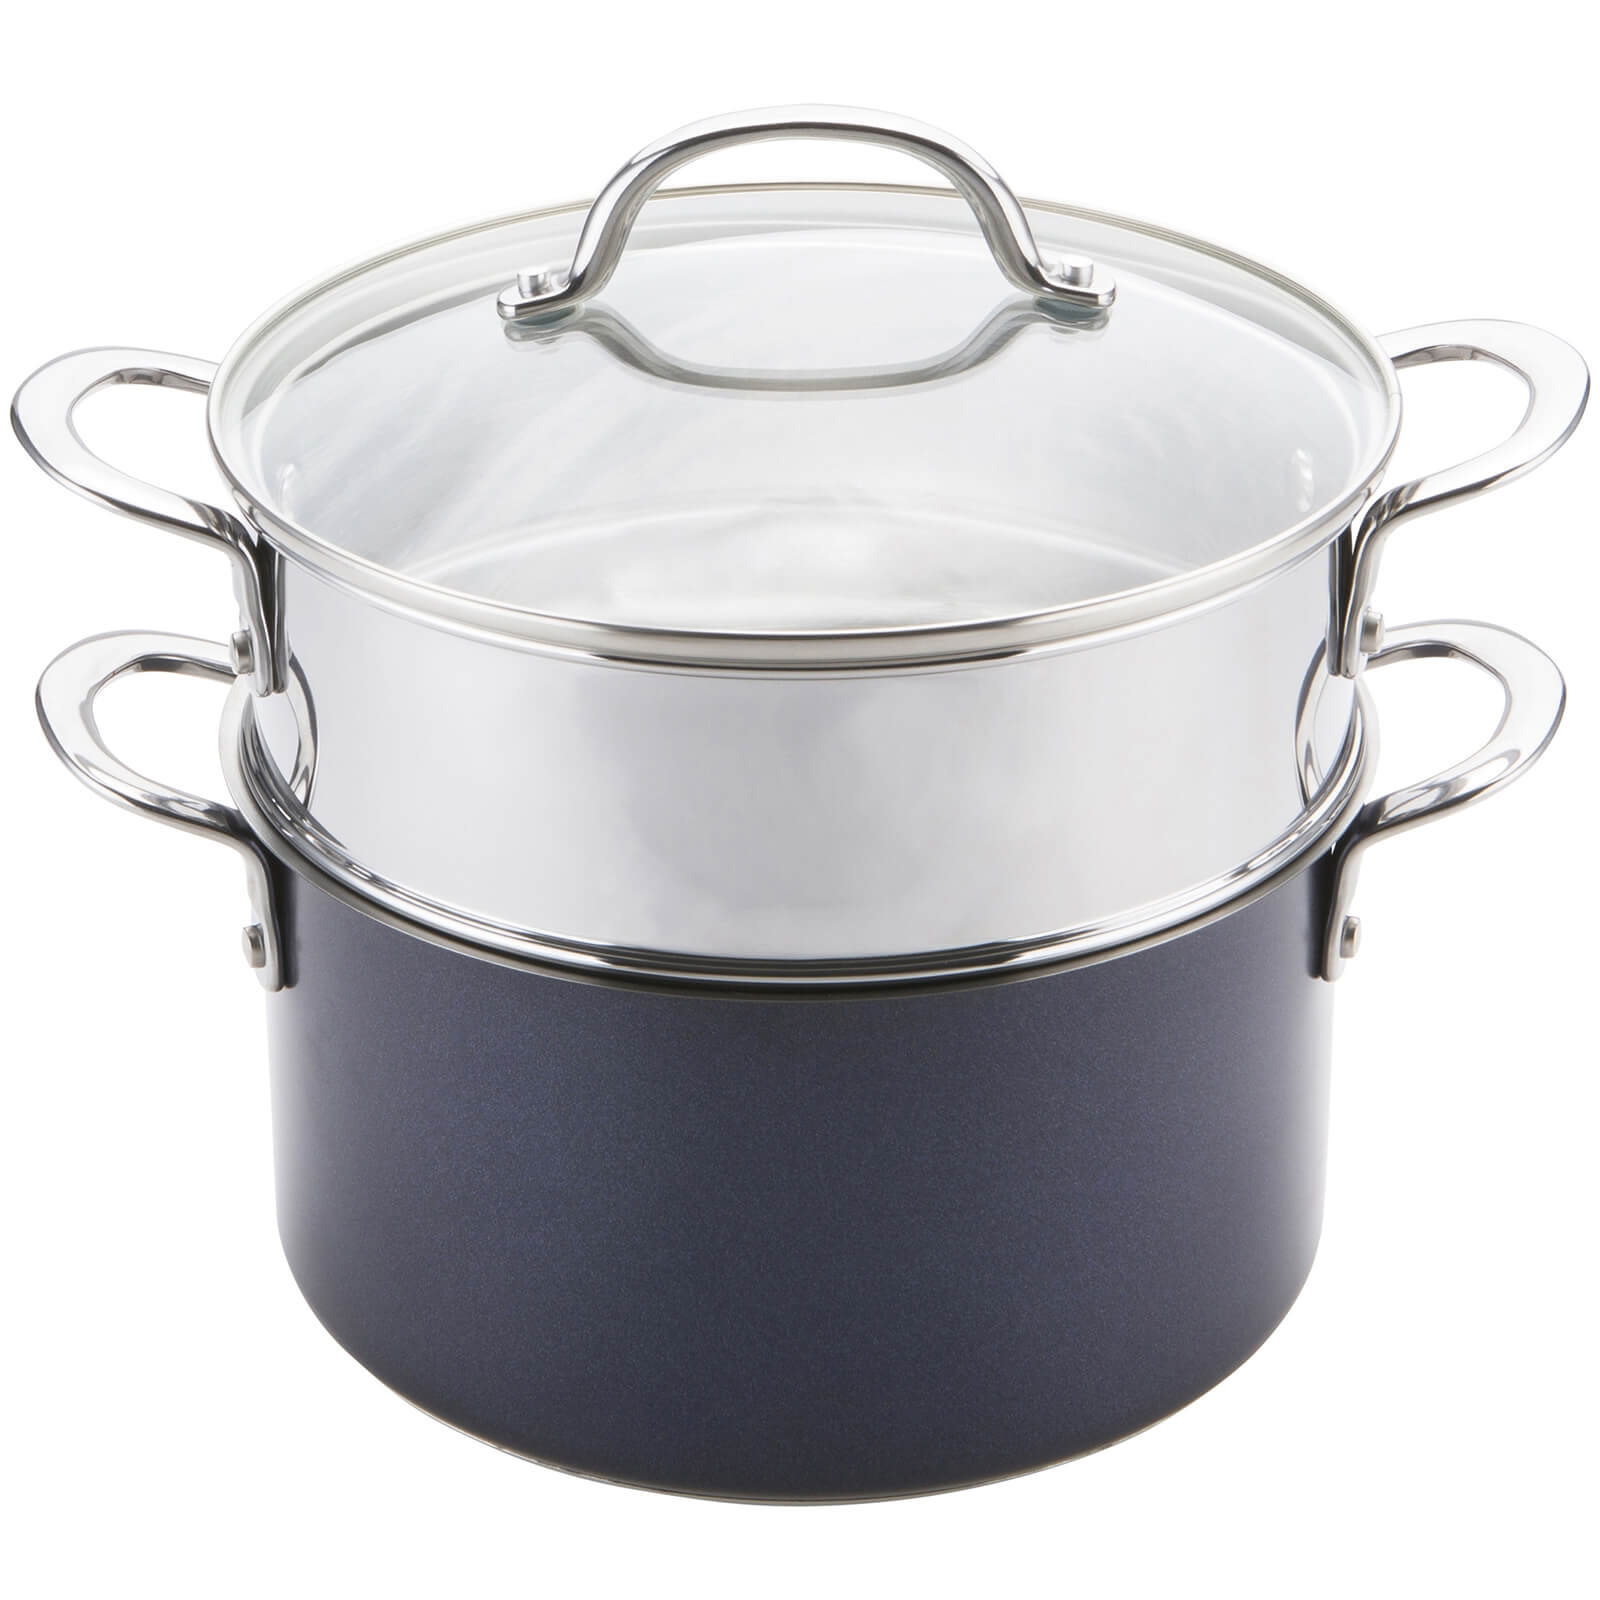 Prestiage Optisteel Induction Stainless Steel 24cm Steamer and Stockpot Set - Blue